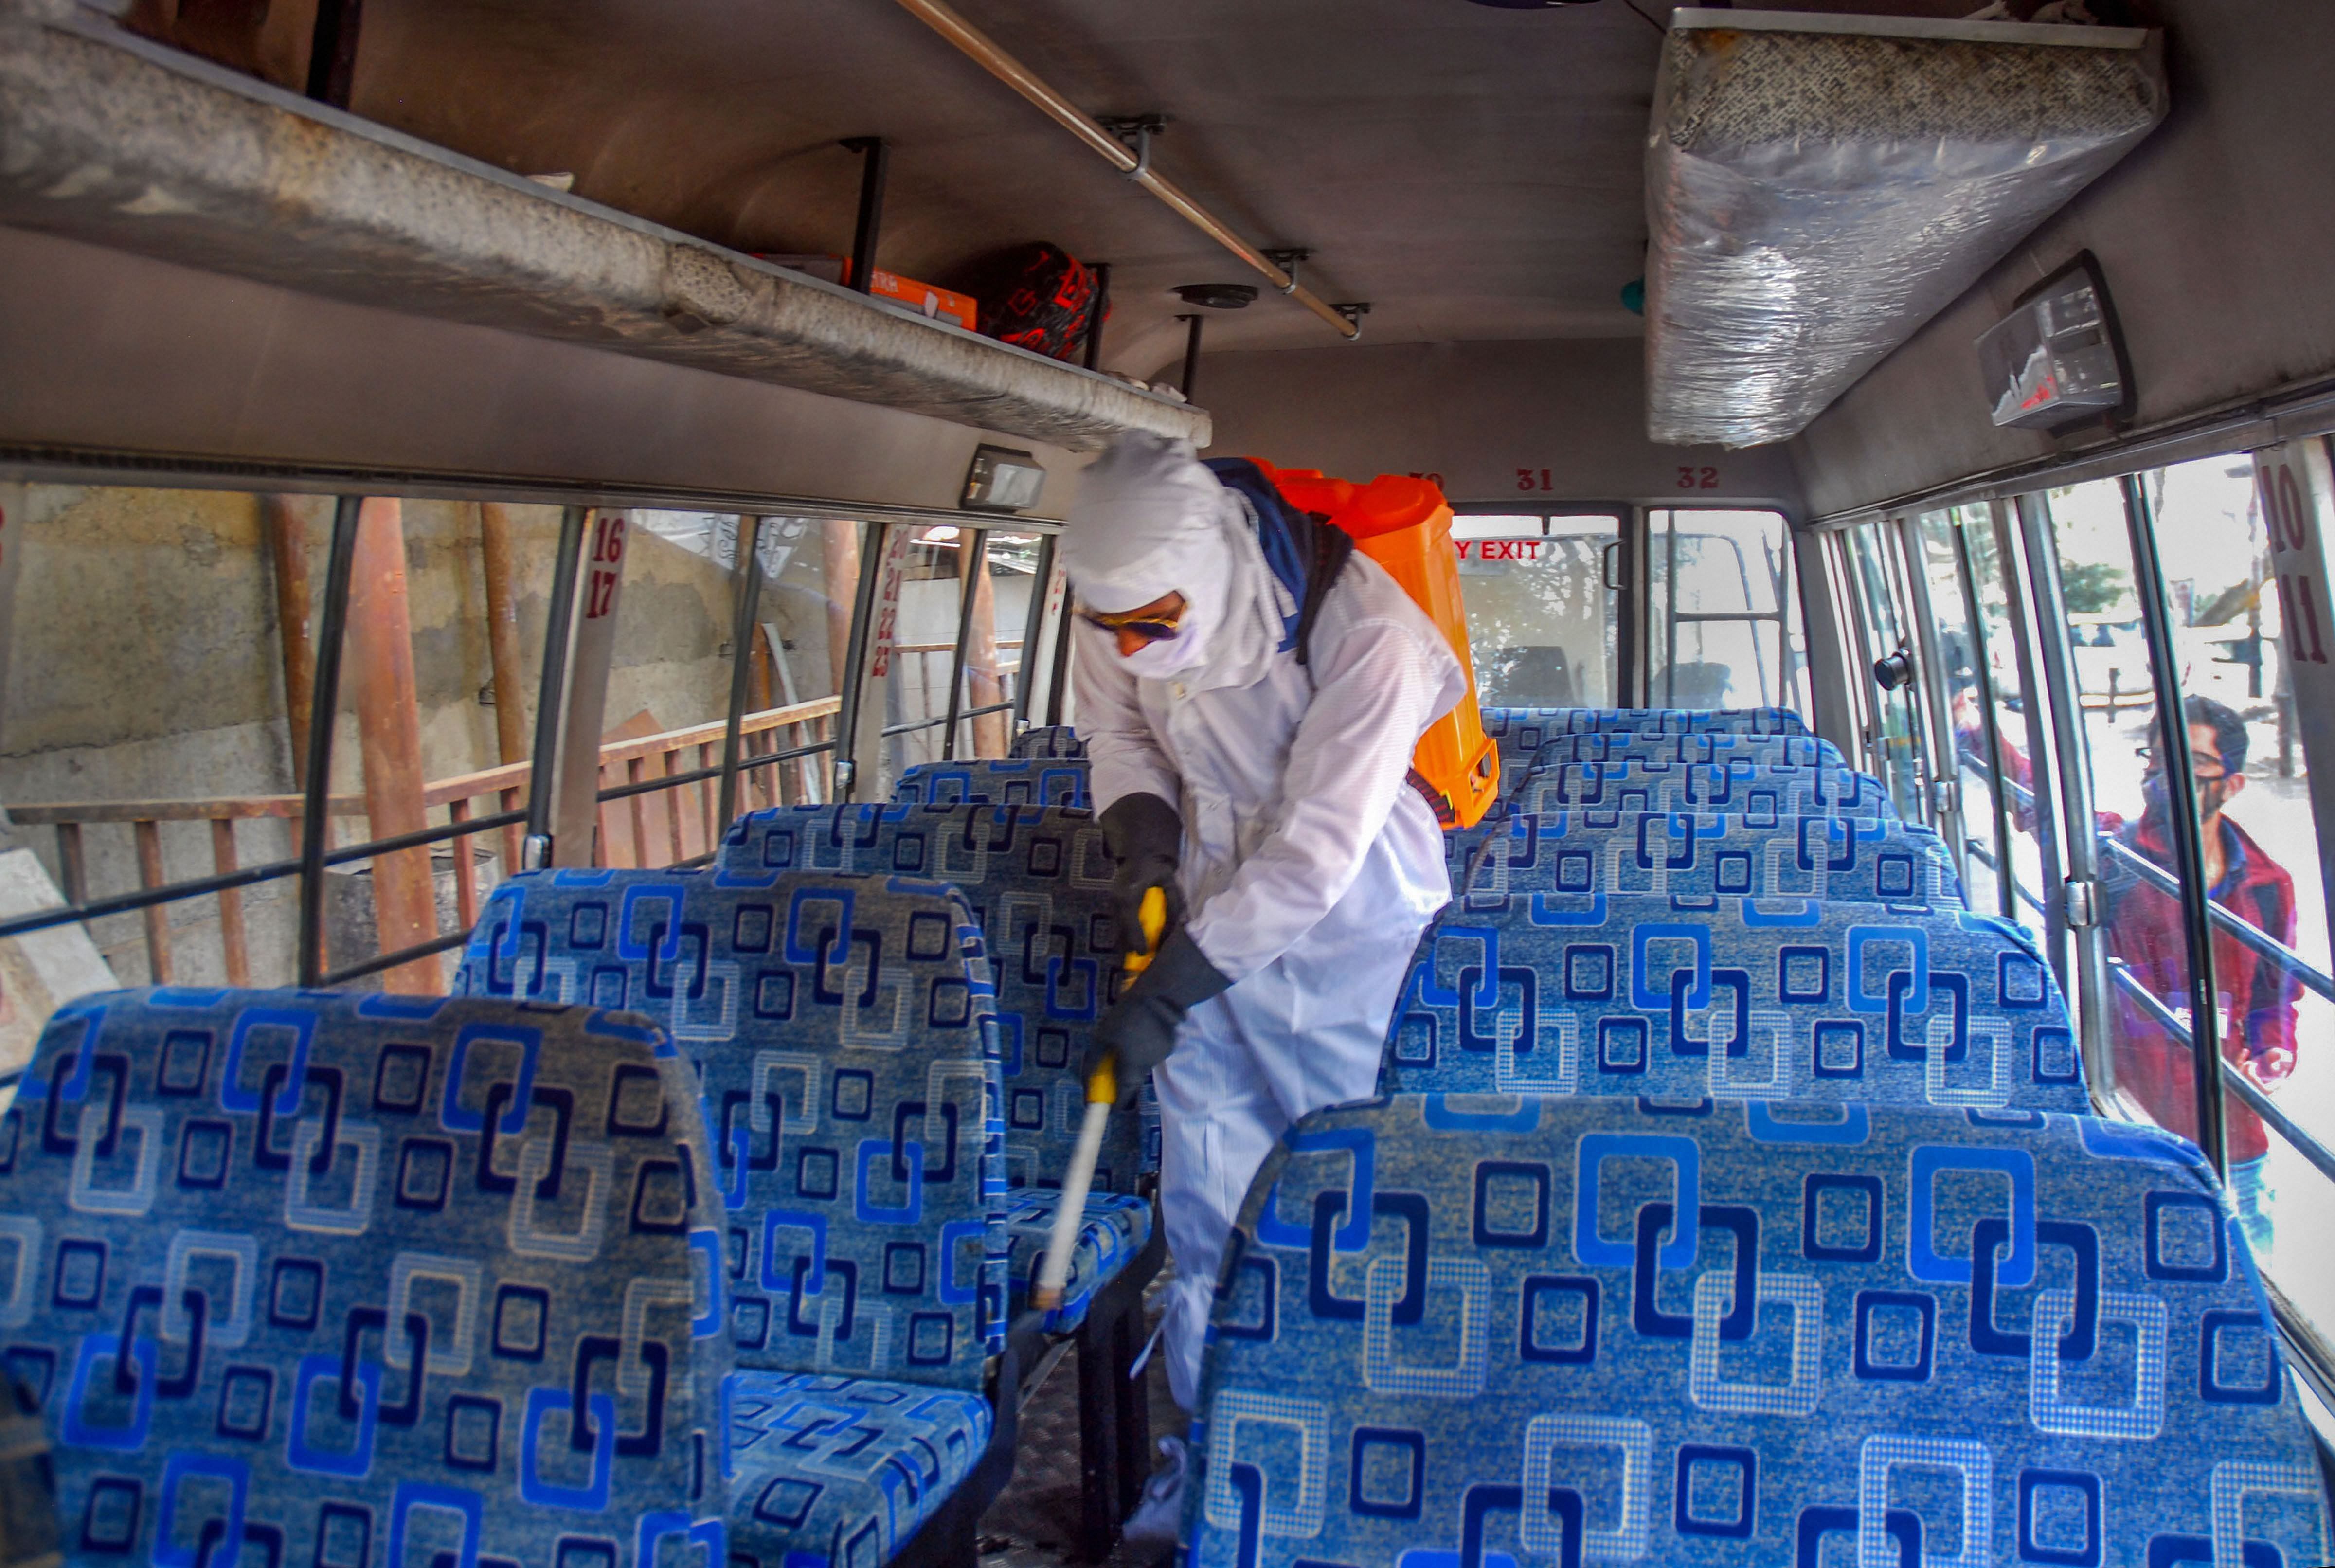 A worker sprays IGMC hospital staff bus after three patients from Nalagarh who were tested positive for Covid-19, had been shifted in the hospital, during a nationwide lockdown in the wake of coronavirus pandemic, in Shimla. (Credit: PTI)